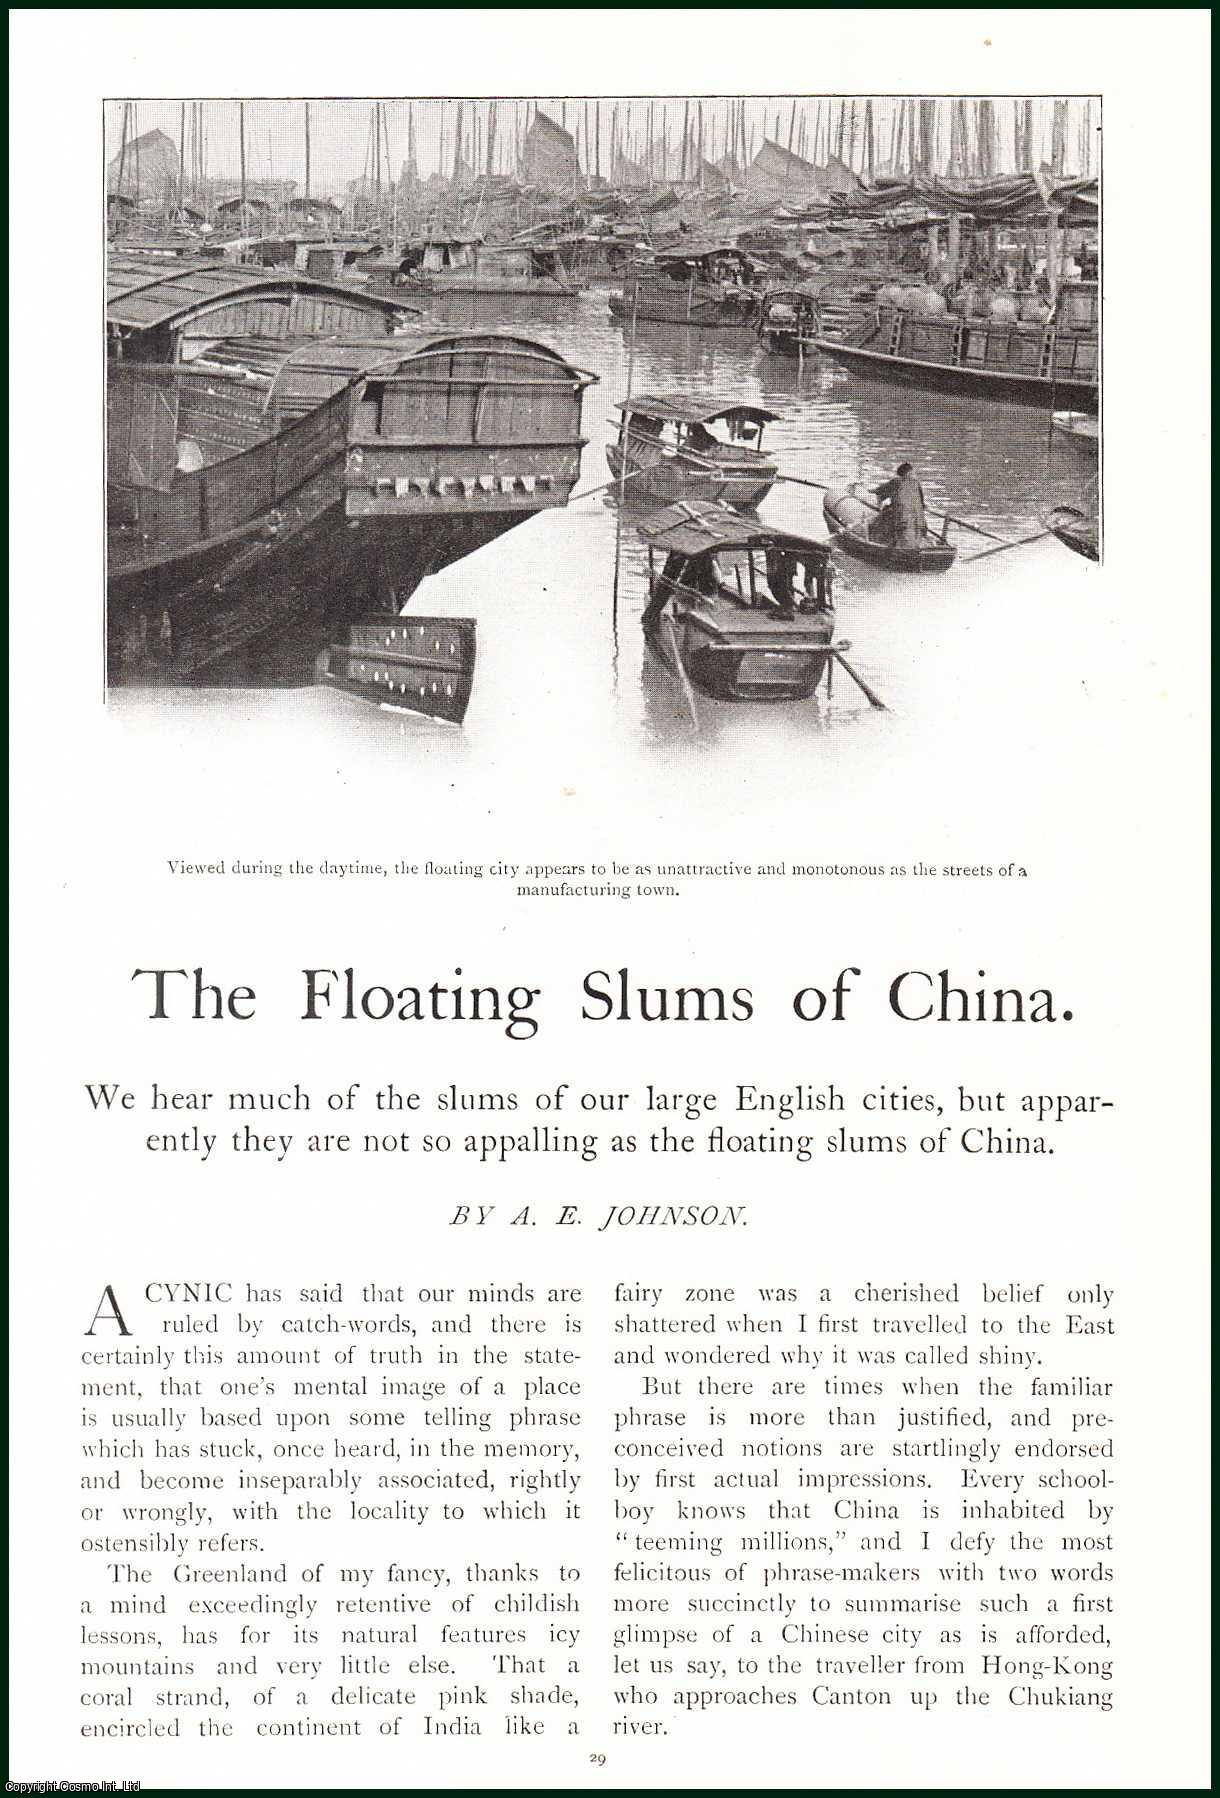 A.E. Johnson - The Floating Slums of China. An uncommon original article from the Lady's Realm, 1909.